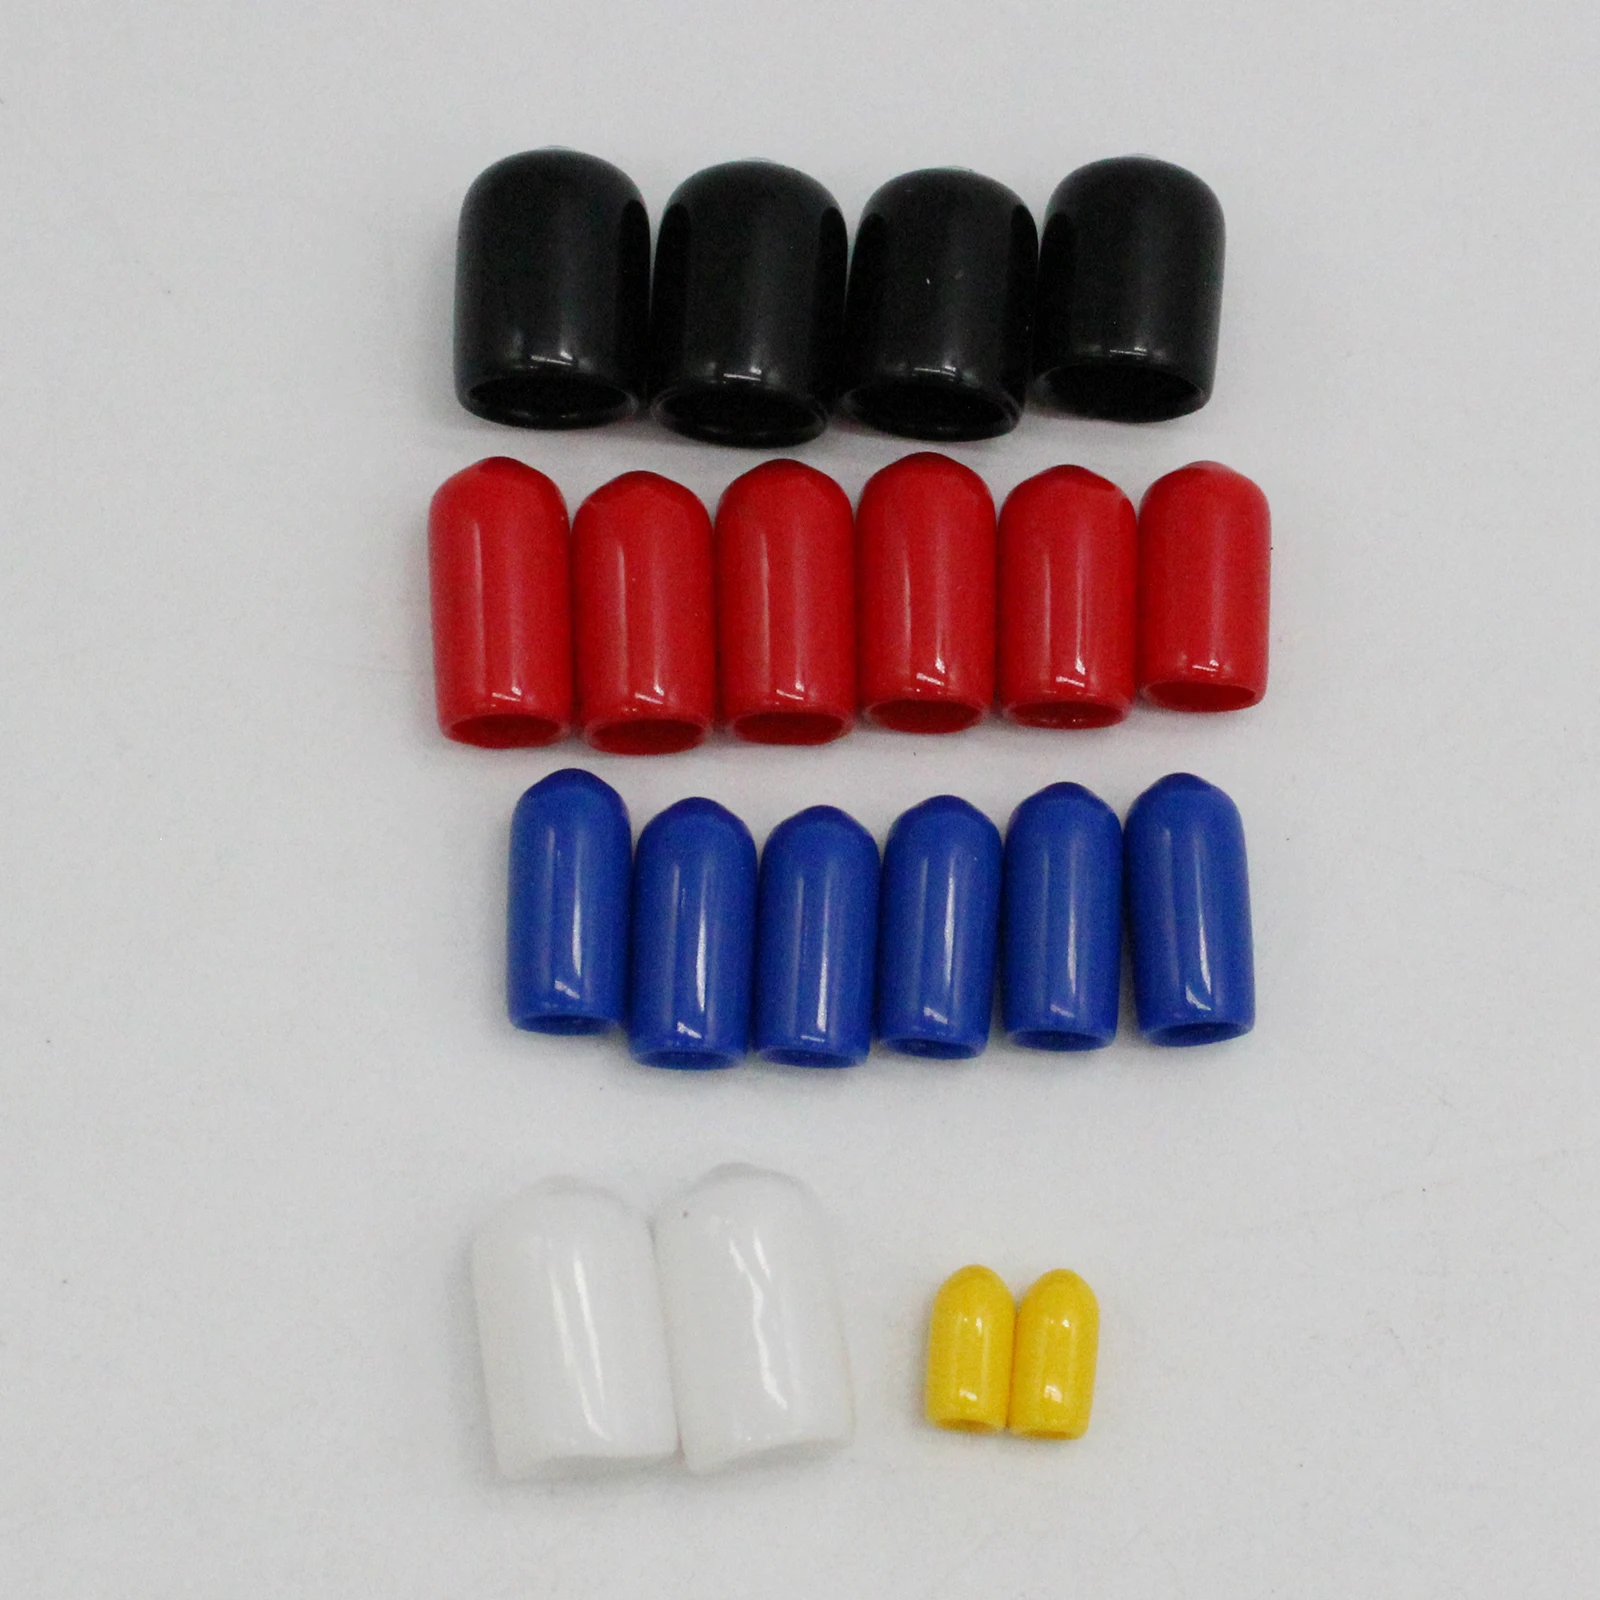 20pcs PVC Vacuum Cap Assortment 1/8in 3/16in 1/4in 3/8in 5/16in Set Kit For Chevy Car Accessories Hoses & Clamps